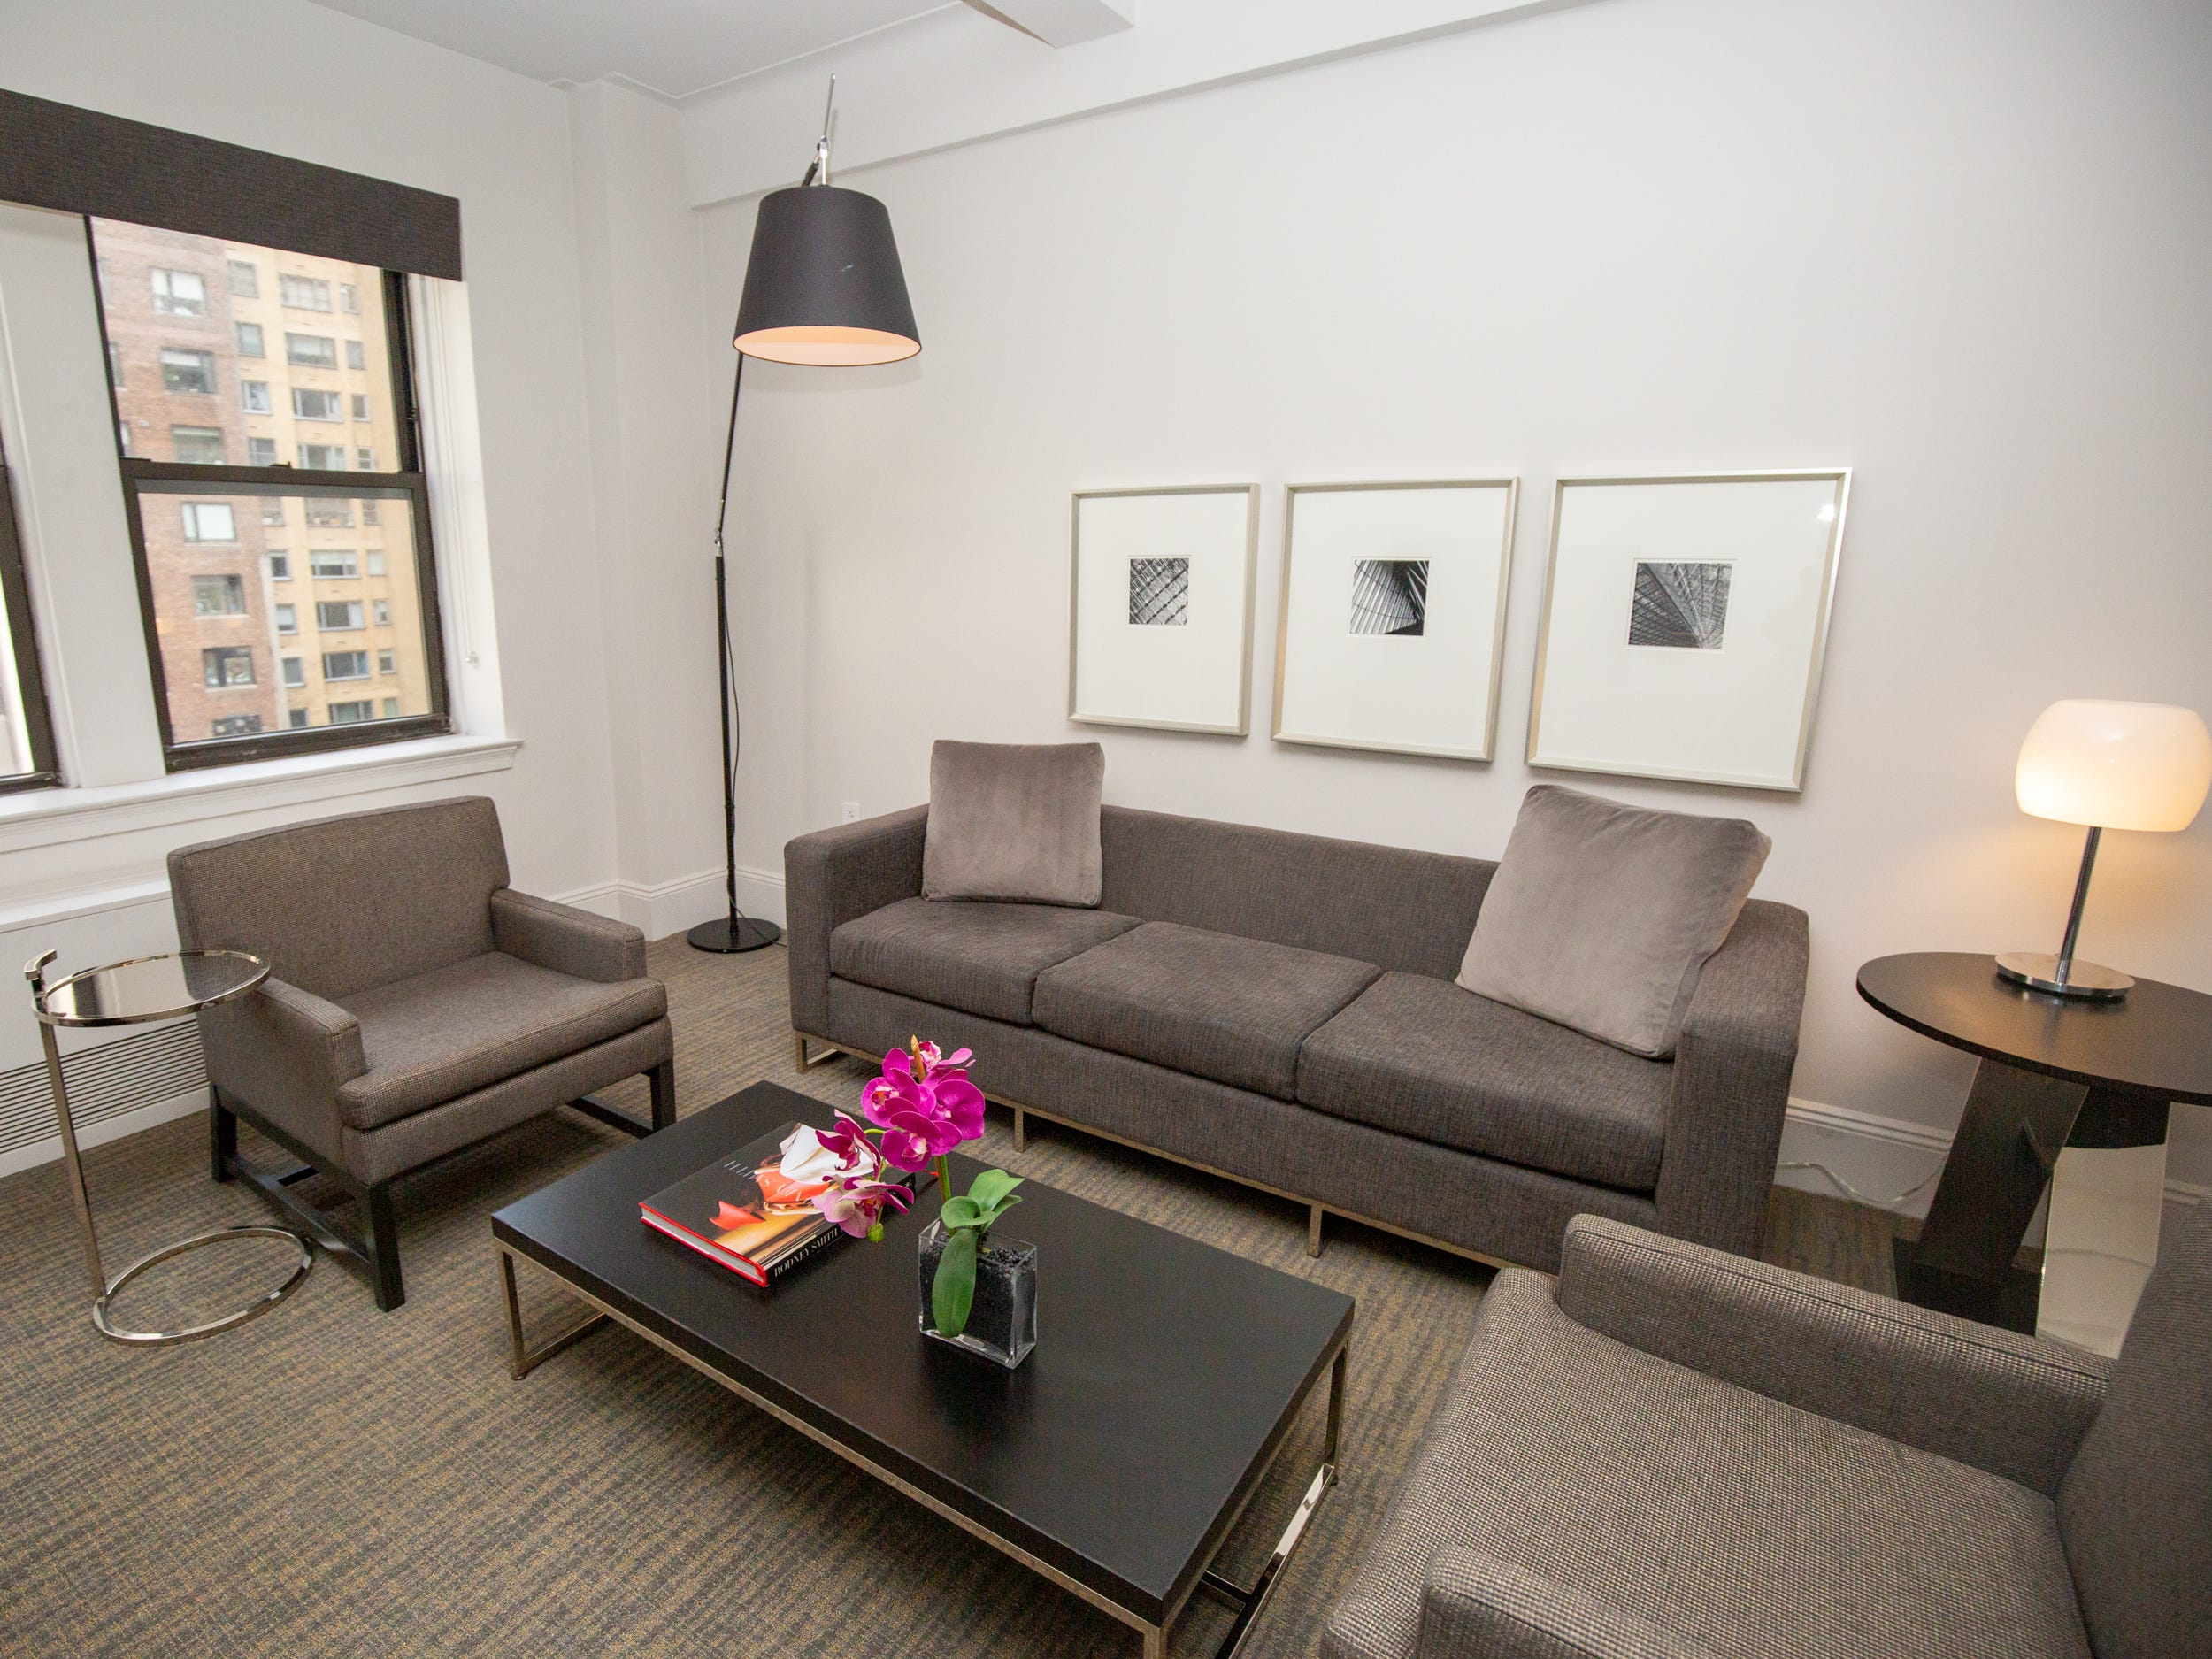 The living room with couches, seats, wall decor, a coffee table, and lights inside a suite at AKA Central Park.